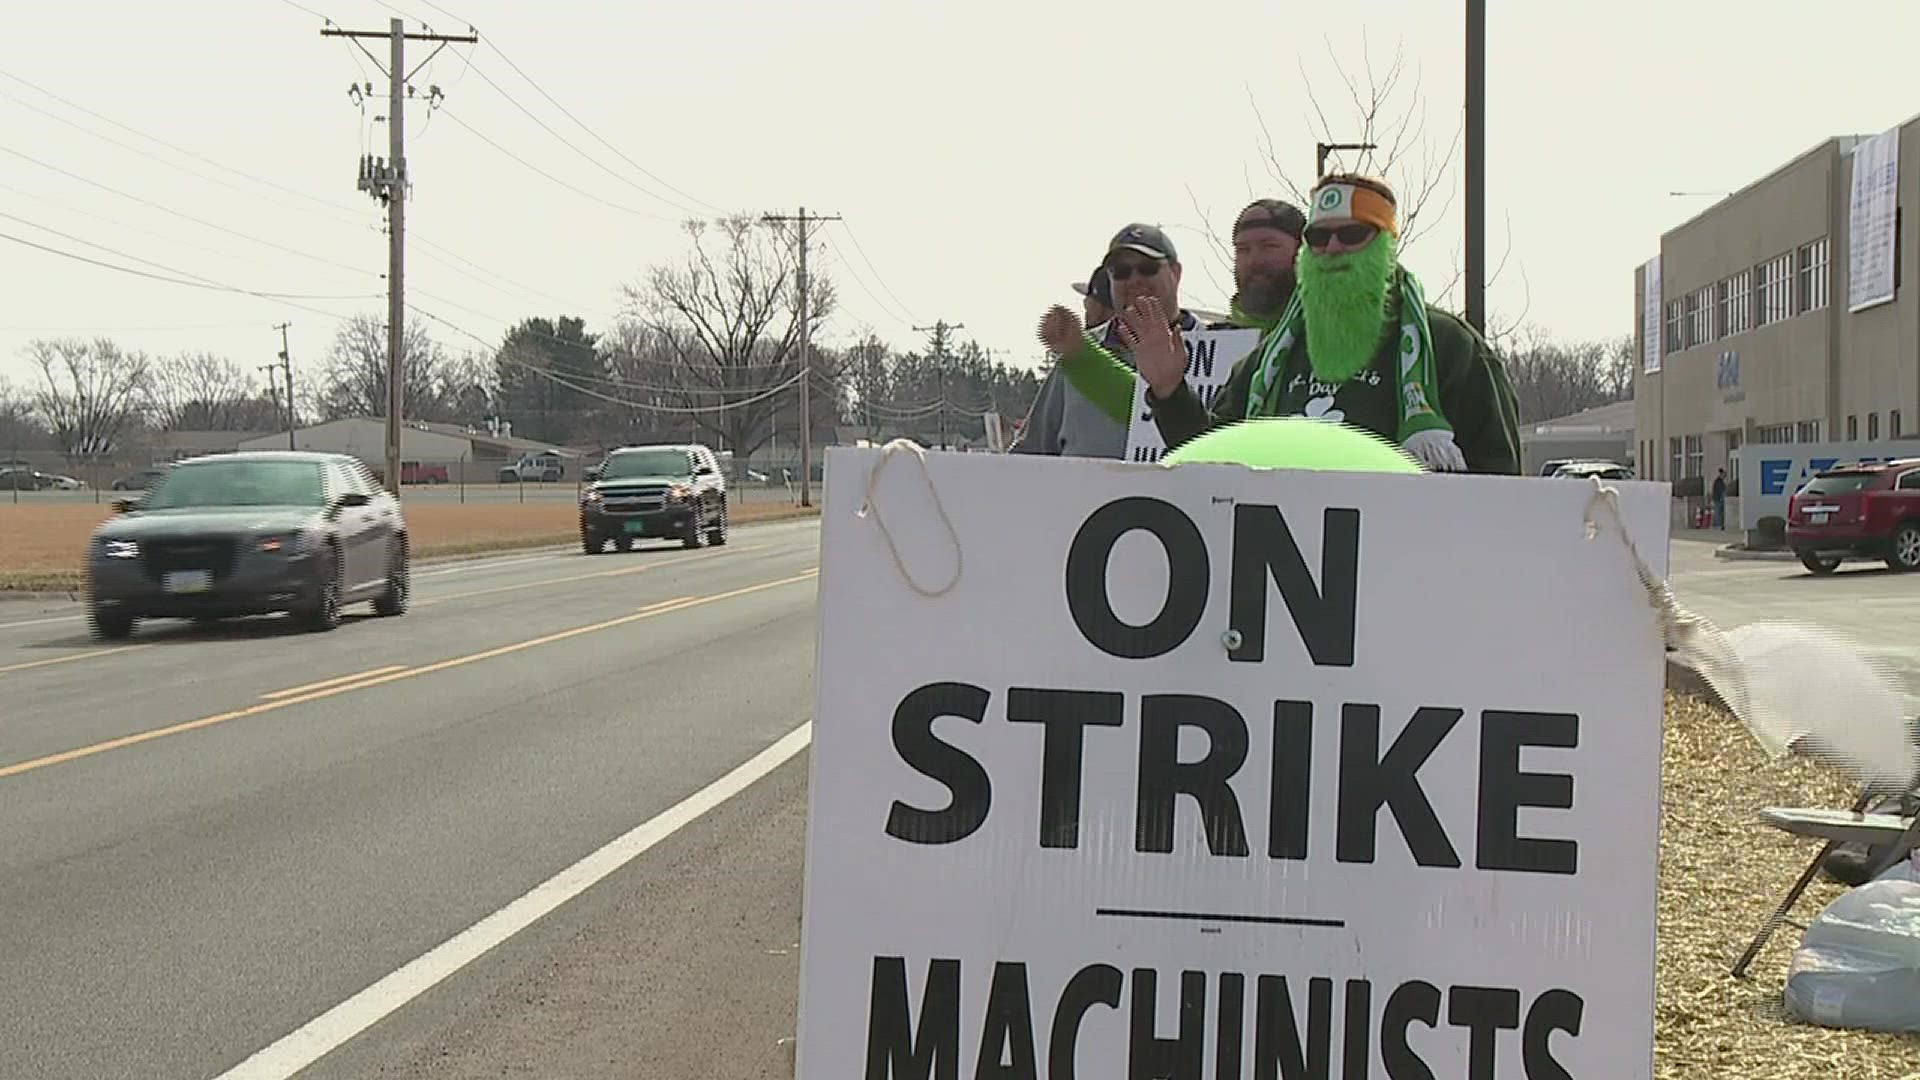 The company is seeking permanent replacements to take the jobs of strikers. Virtual talks between the Machinists Union and Eaton were set to resume on March 15.